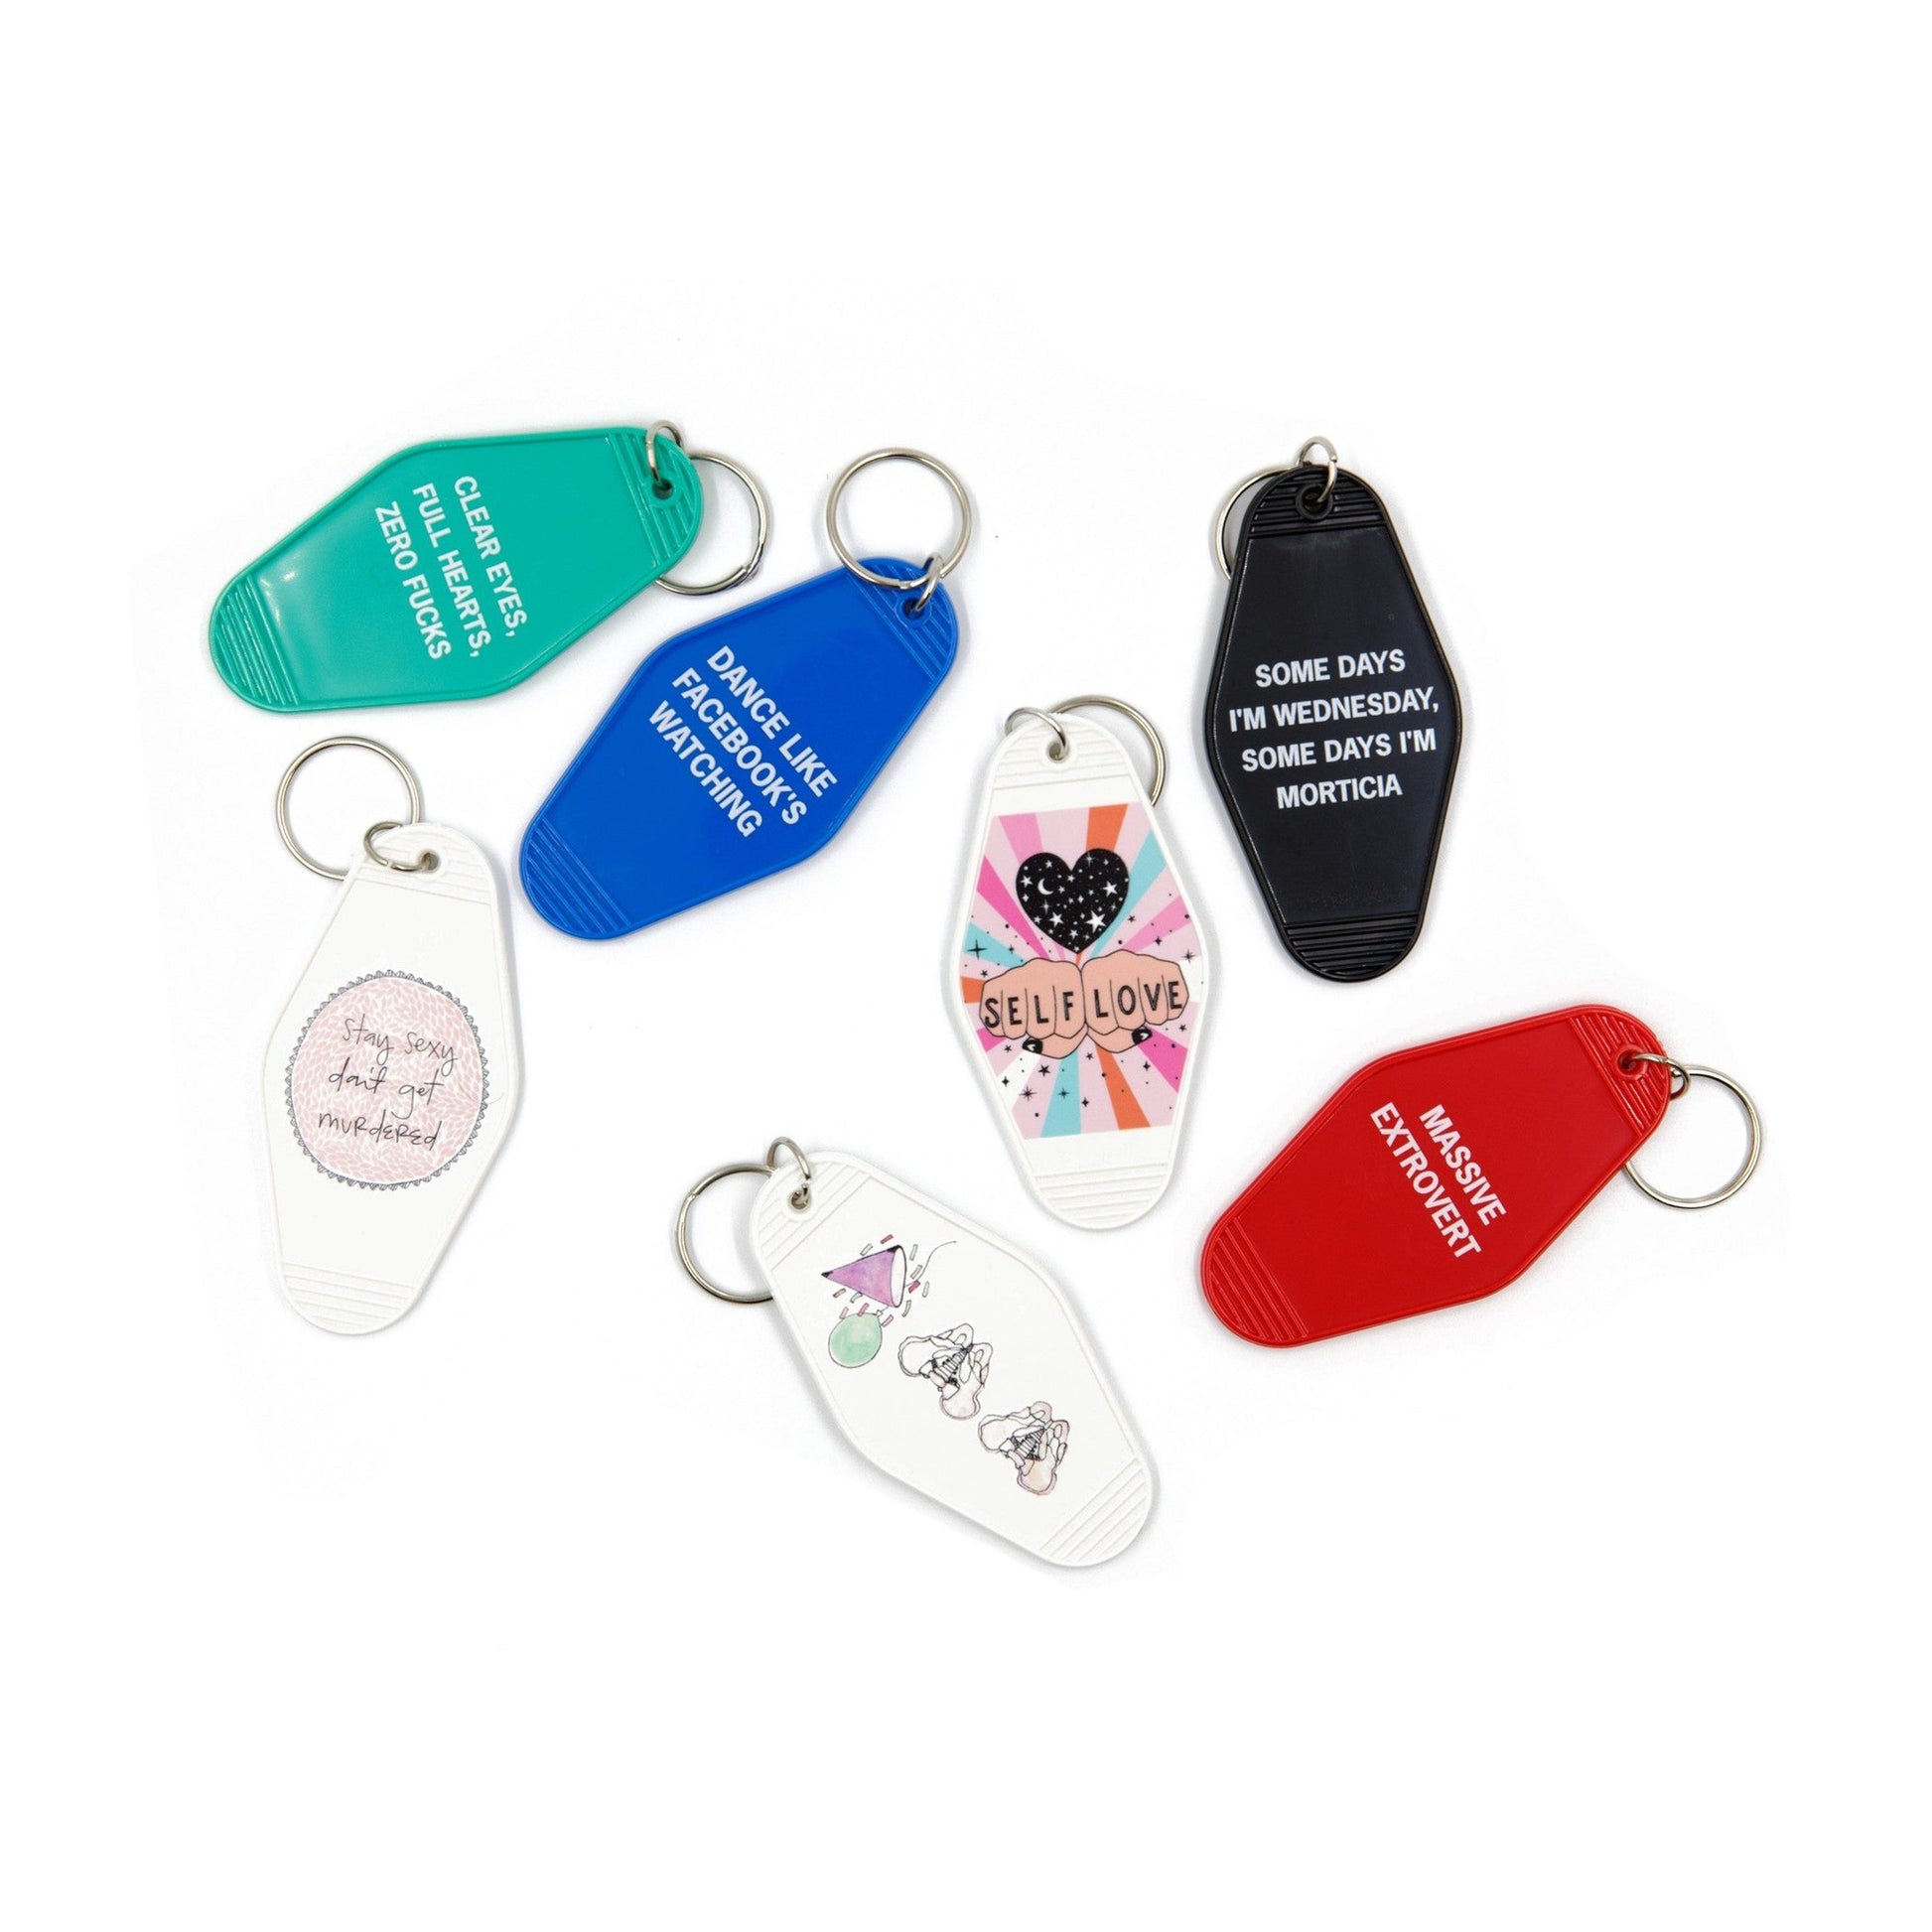 Massive Extrovert Motel Style Keychain In Red